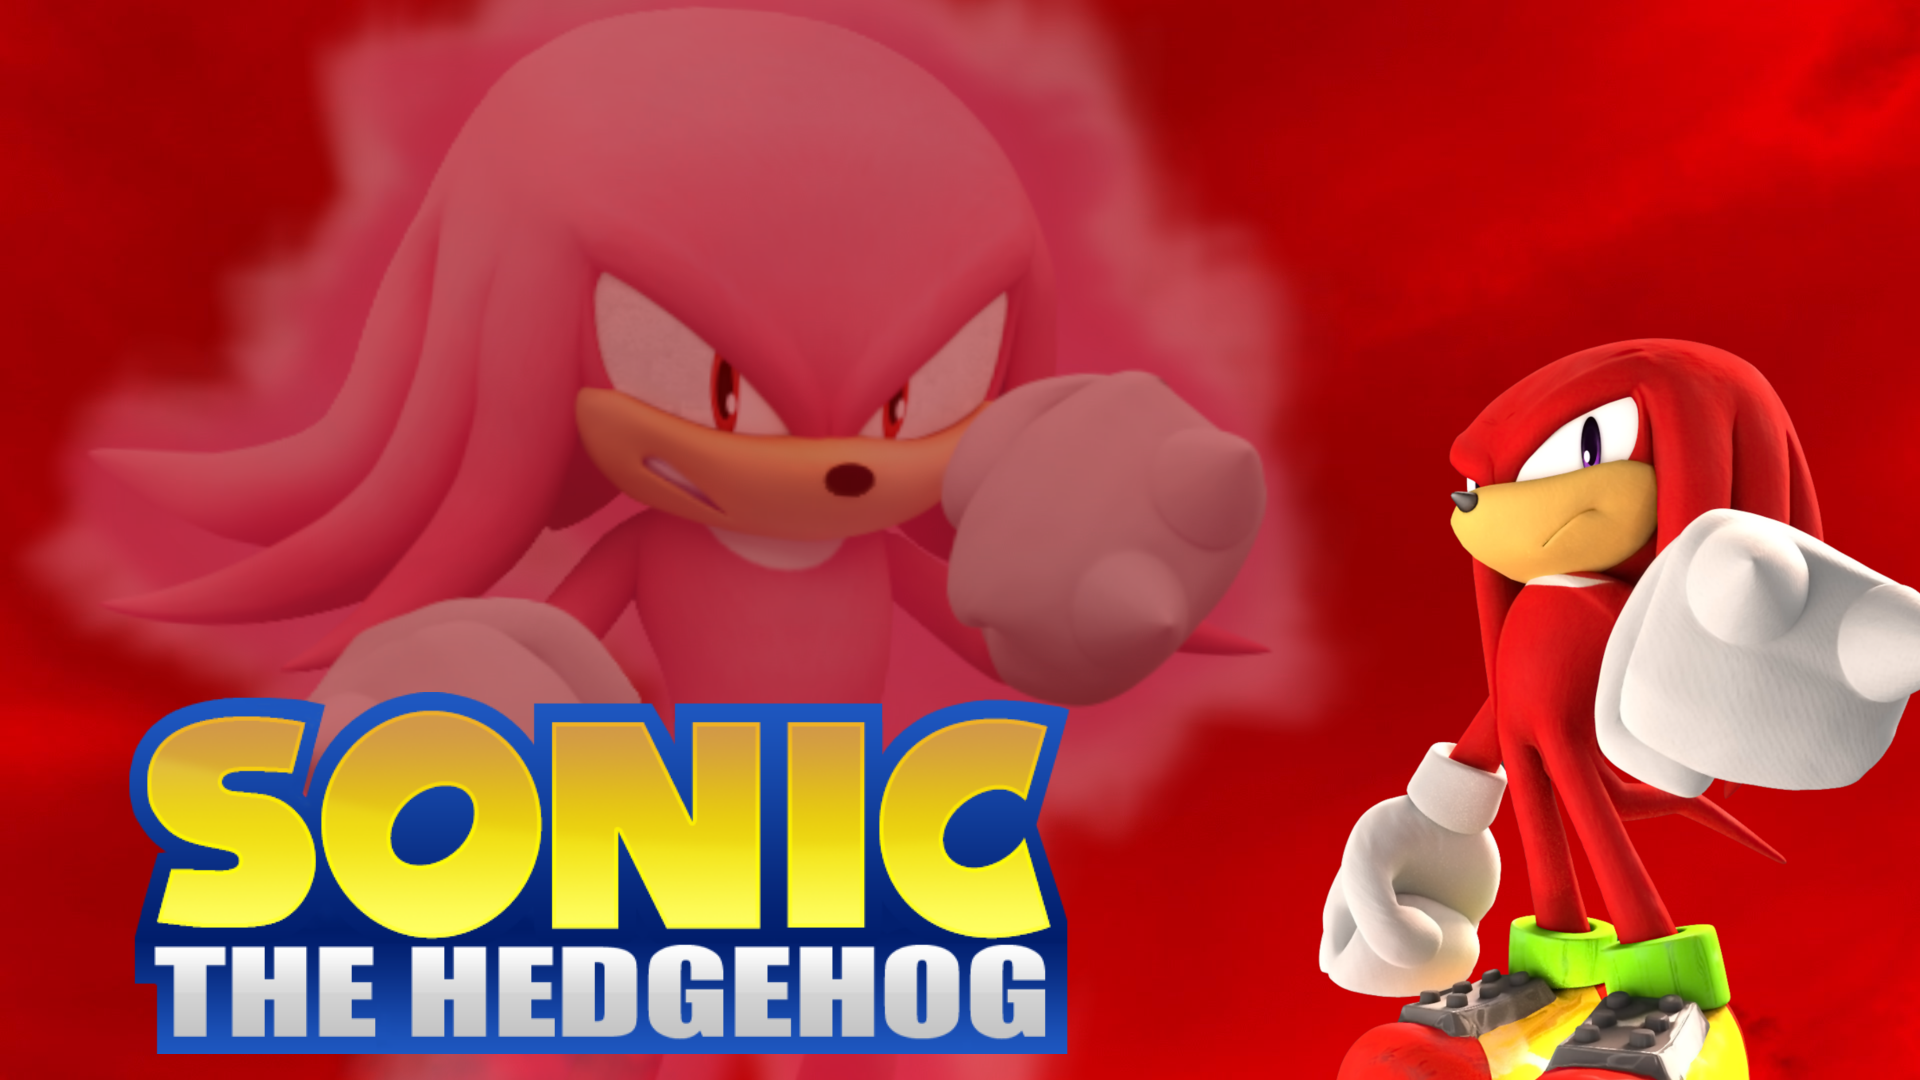 Knuckles The Echidna Wallpaper by AxelG4m3r by AxelG4m3r